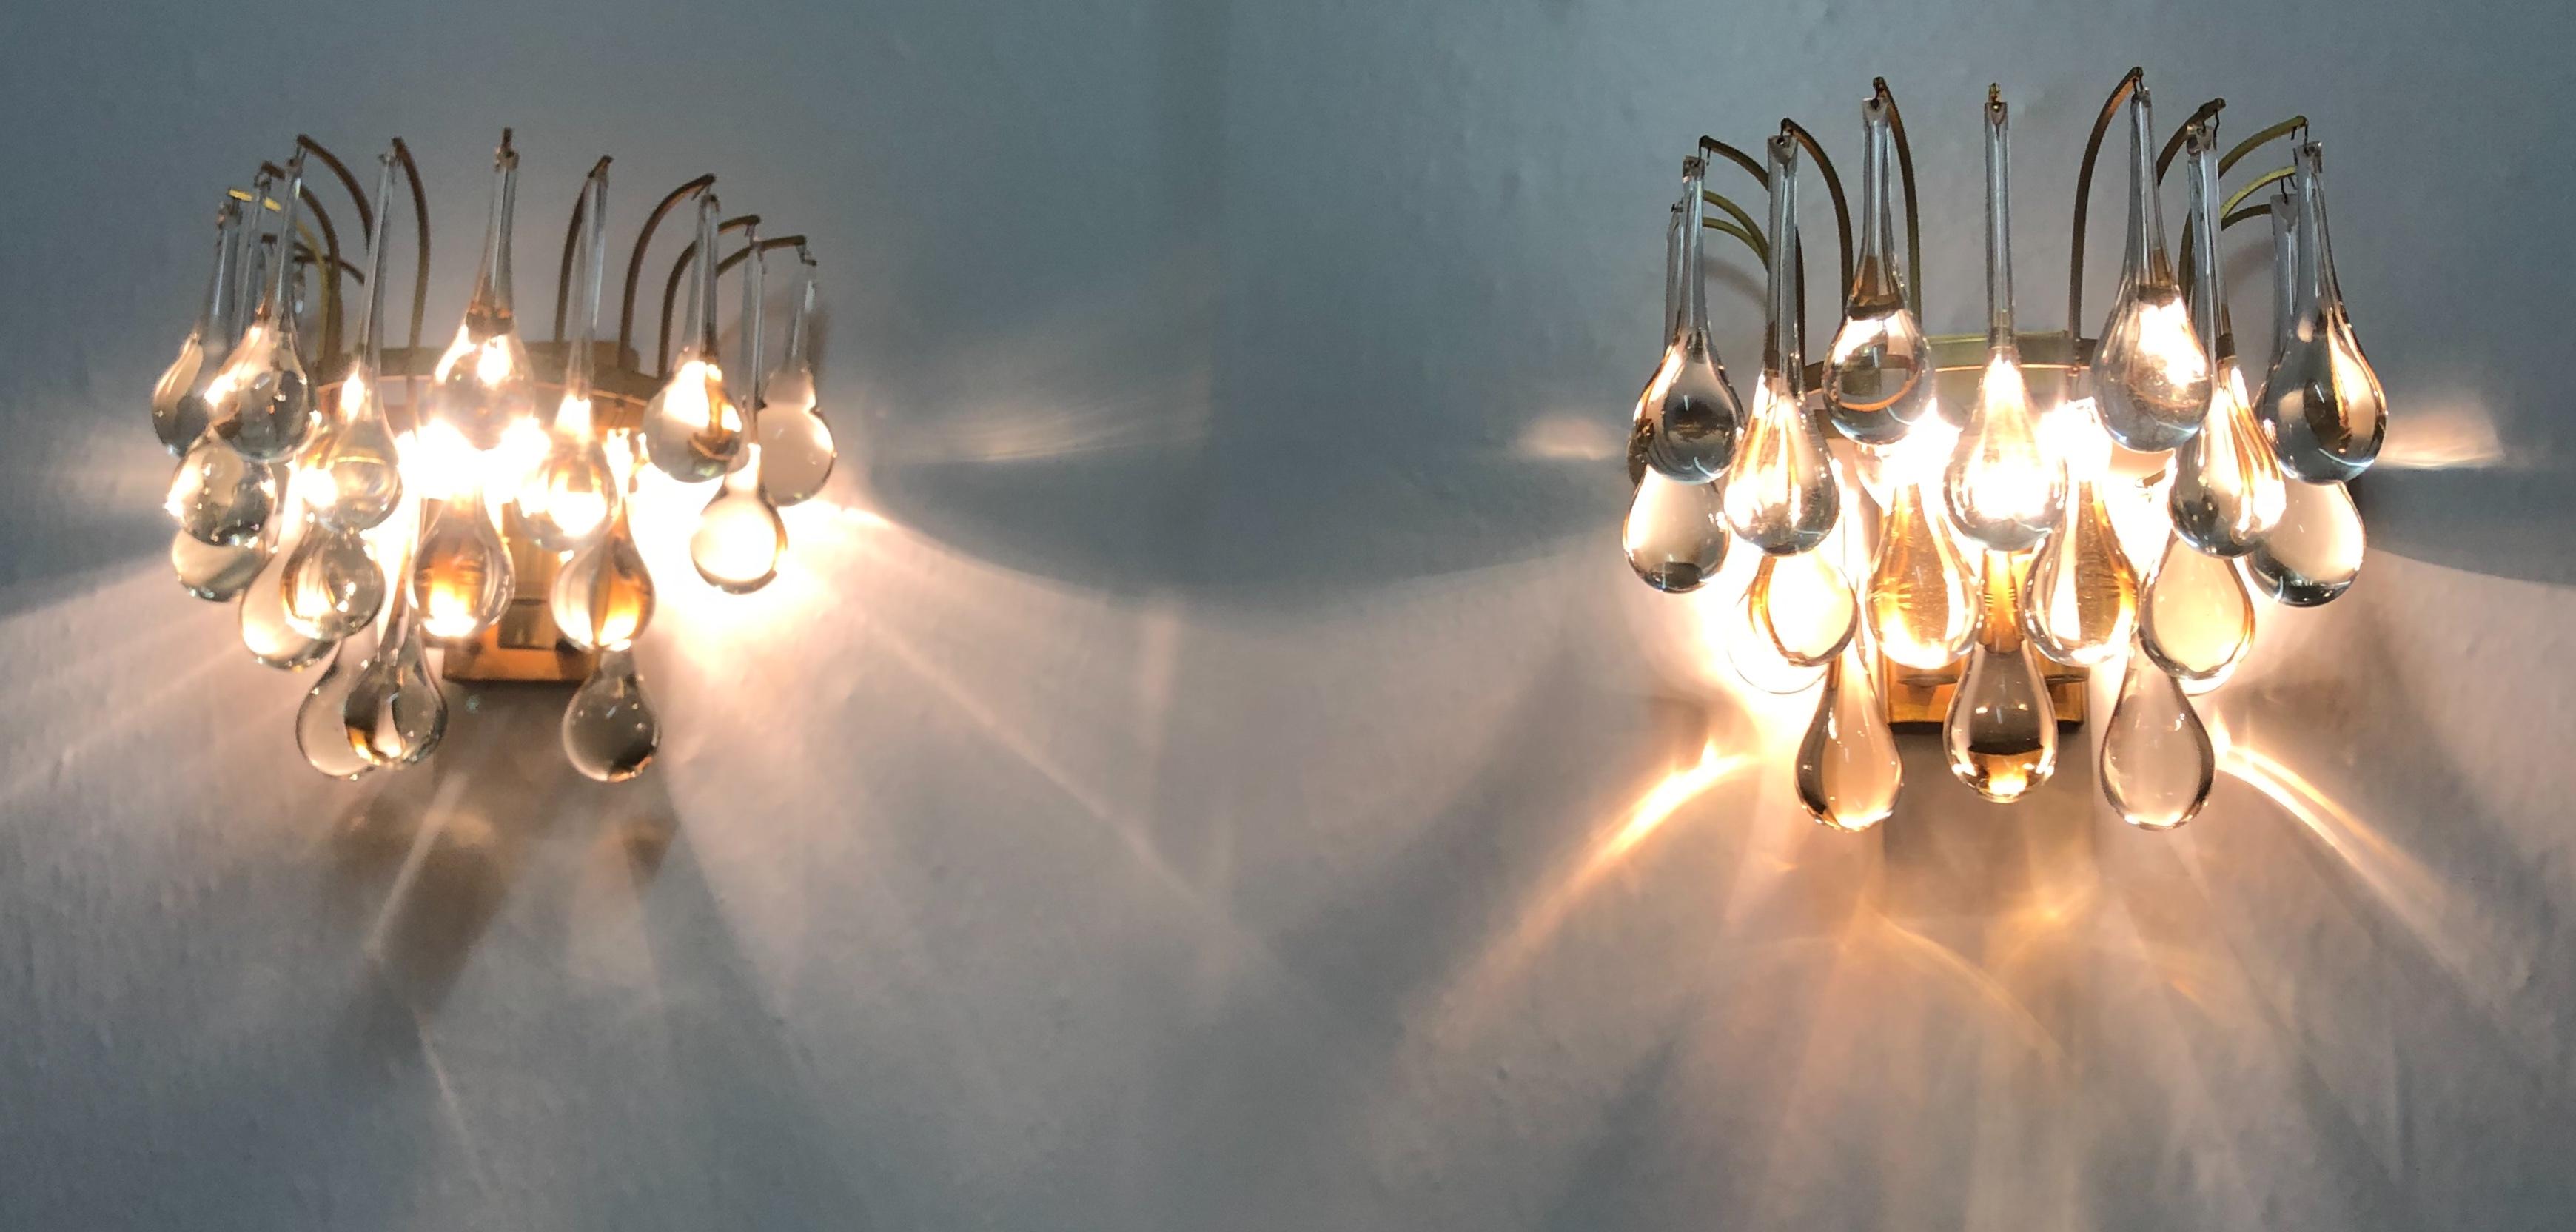 Polished Pair of Midcentury Murano Glass Wall Sconces by E.Palme, circa 1960s